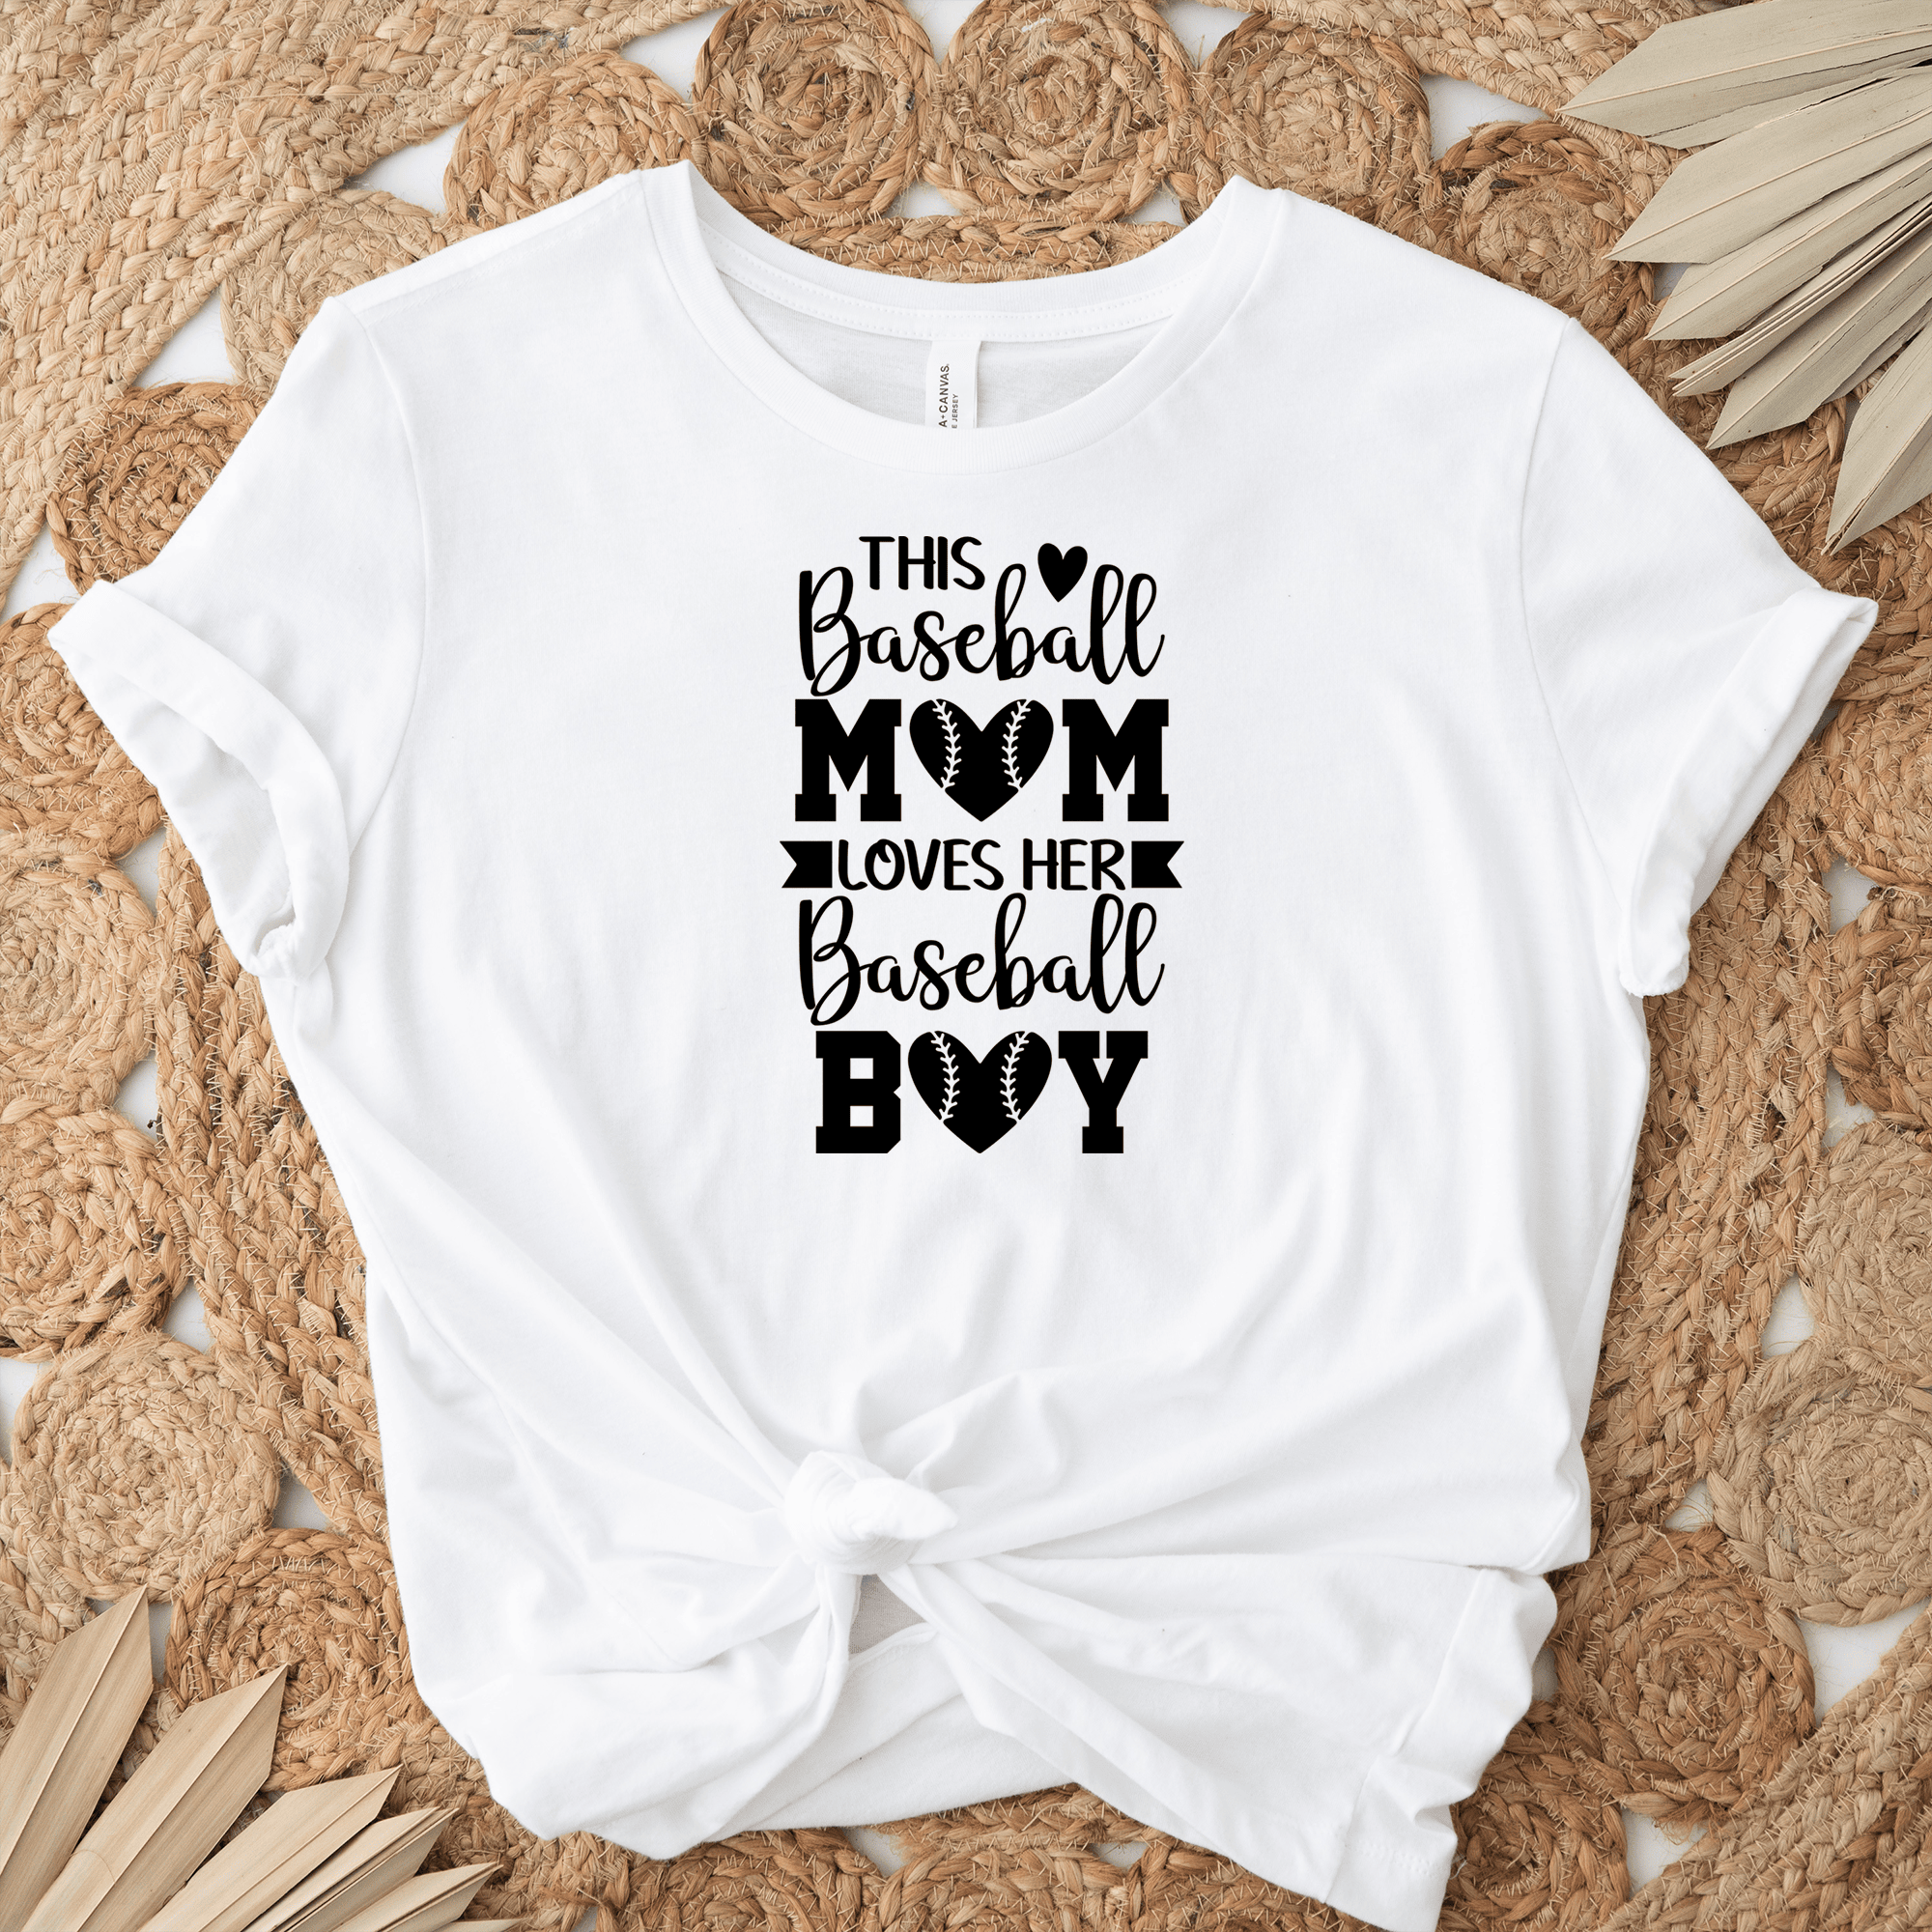 Womens White T Shirt with This-Baseball-Mom-Loves-Her-Son design